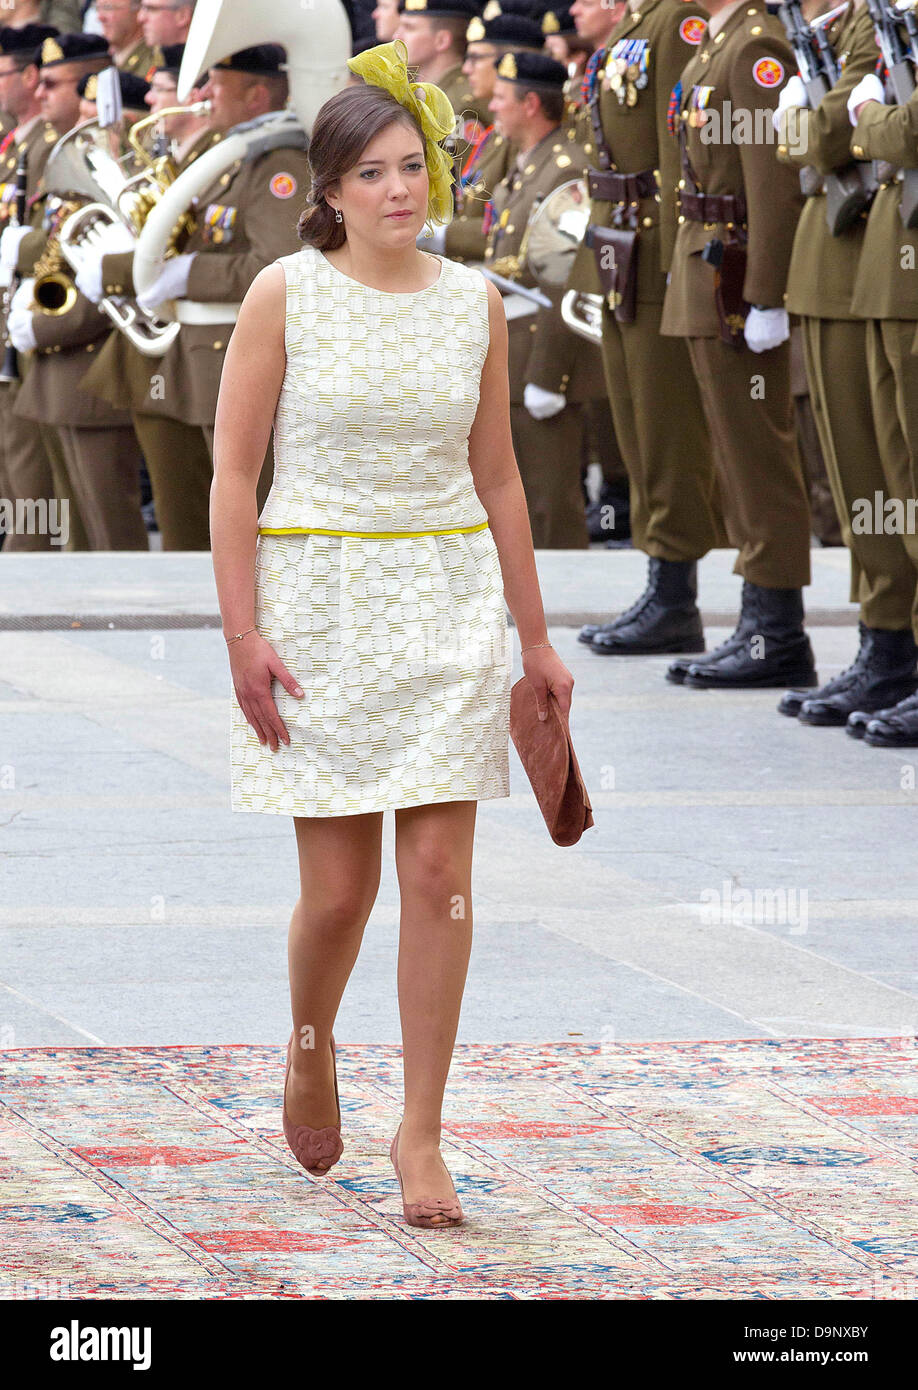 Luxembourg, 23 June 2013. Princess Alexandra of Luxembourg attends the mass  at the National Day in